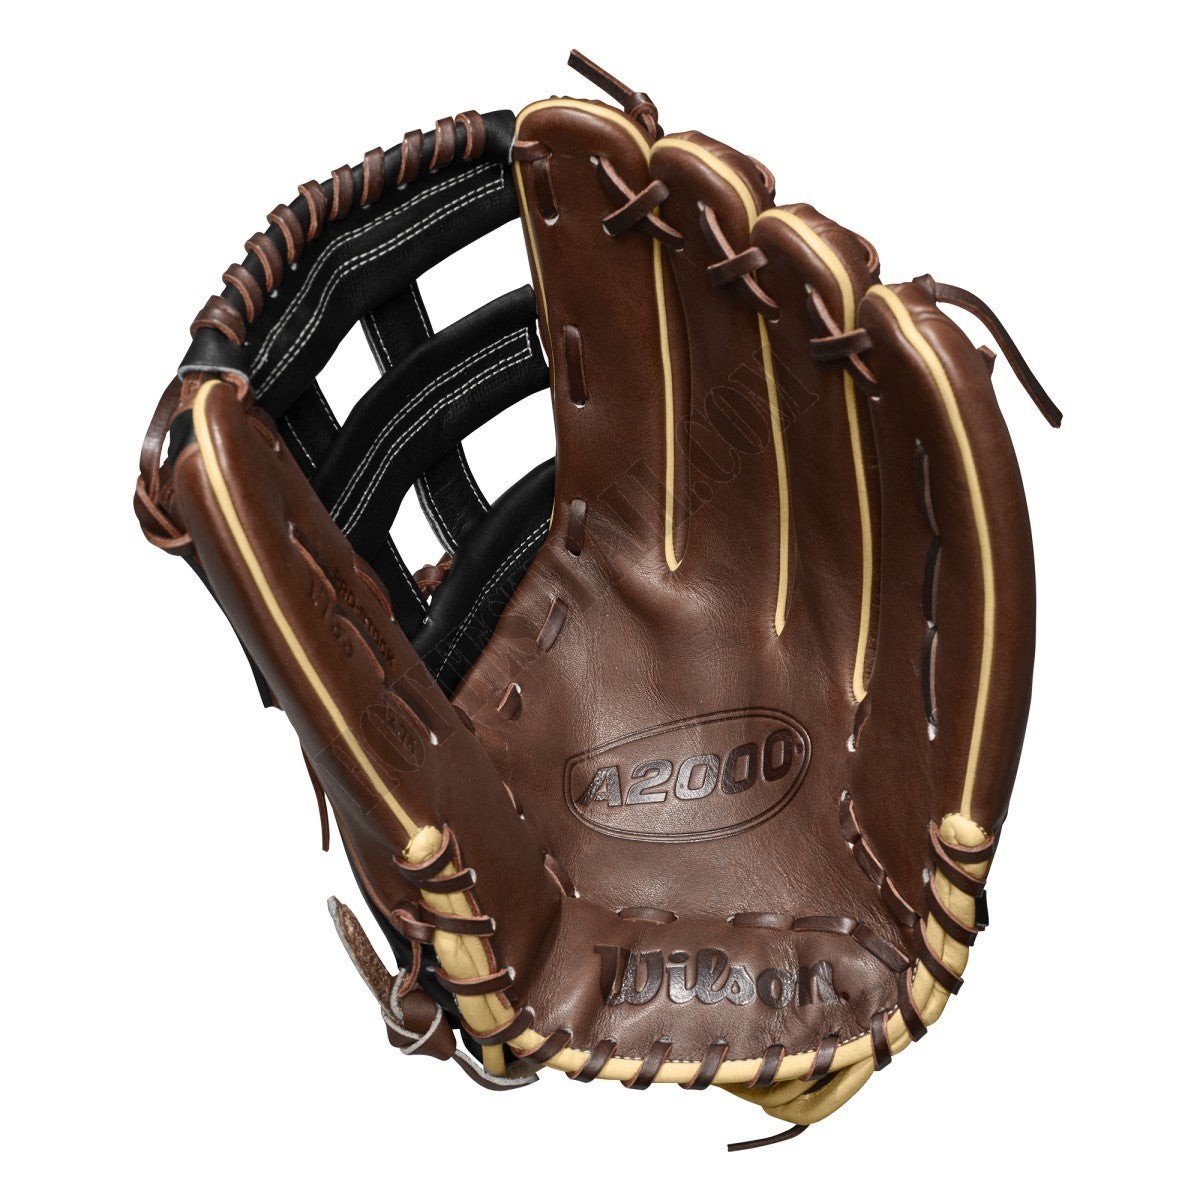 2020 A2000 1799 12.75" Outfield Baseball Glove ● Wilson Promotions - -2